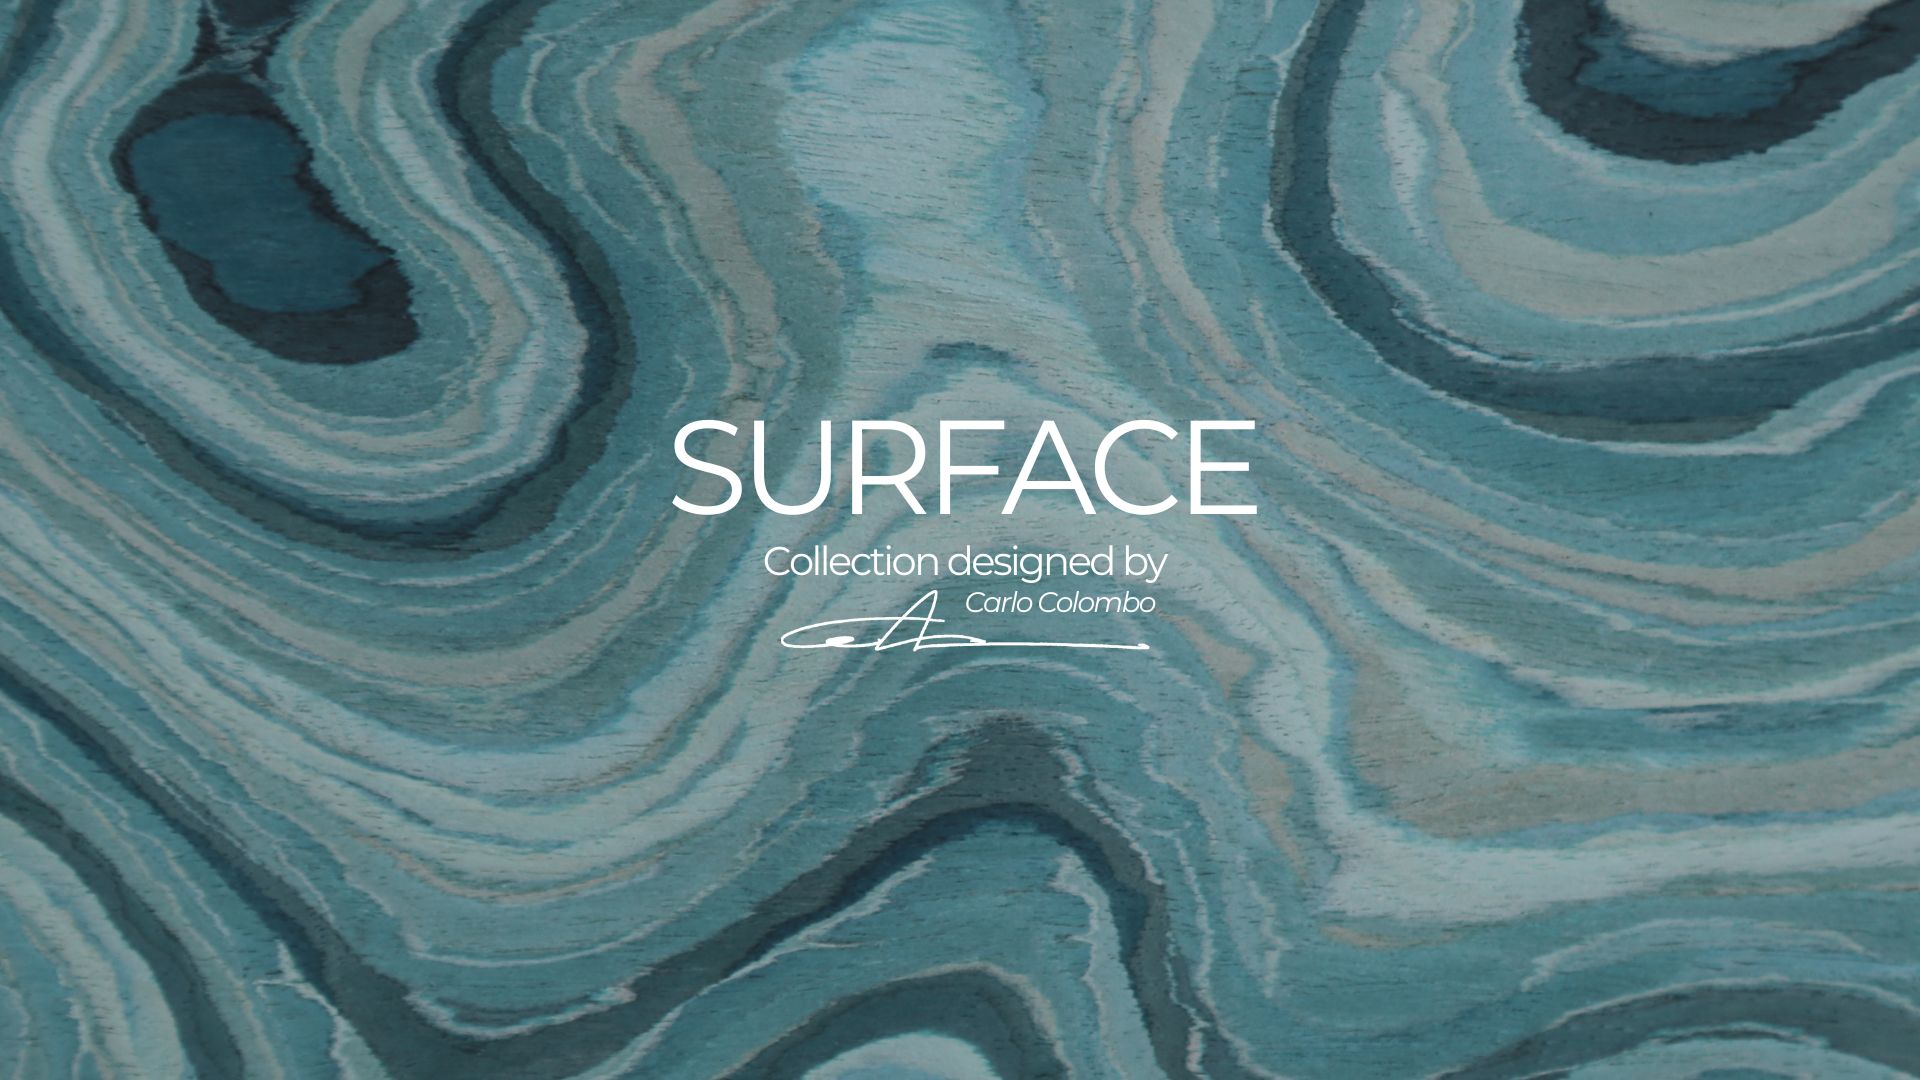 Suface – Just slide